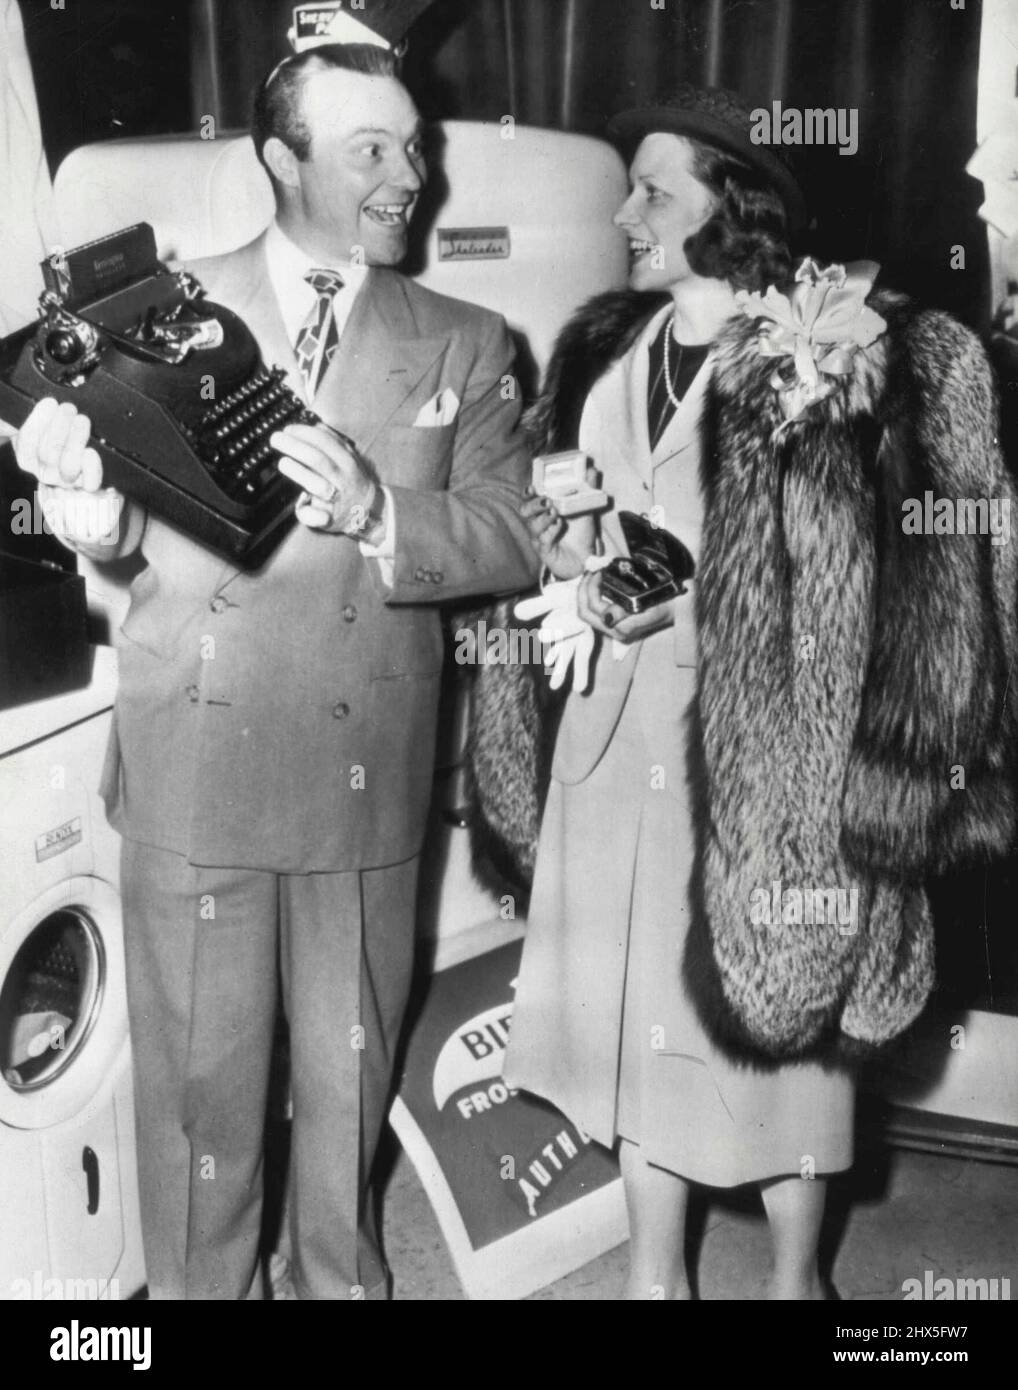 Hush Money -- Mrs. William McCormic, Lockhaven, Pa., housewife who identified ex-film actress Clara Bow as 'Mrs. Hush' to win a radio contest, receives some of the $17, 000 worth of prizes from program director Ralph Edwards. Here today. She holds a diamond and rugy wristwatchk, a diamond ring and wears a fur coat. In background is a washing machine and a refrigerator. March 22, 1947. (Photo by AP Wirephoto). Stock Photo